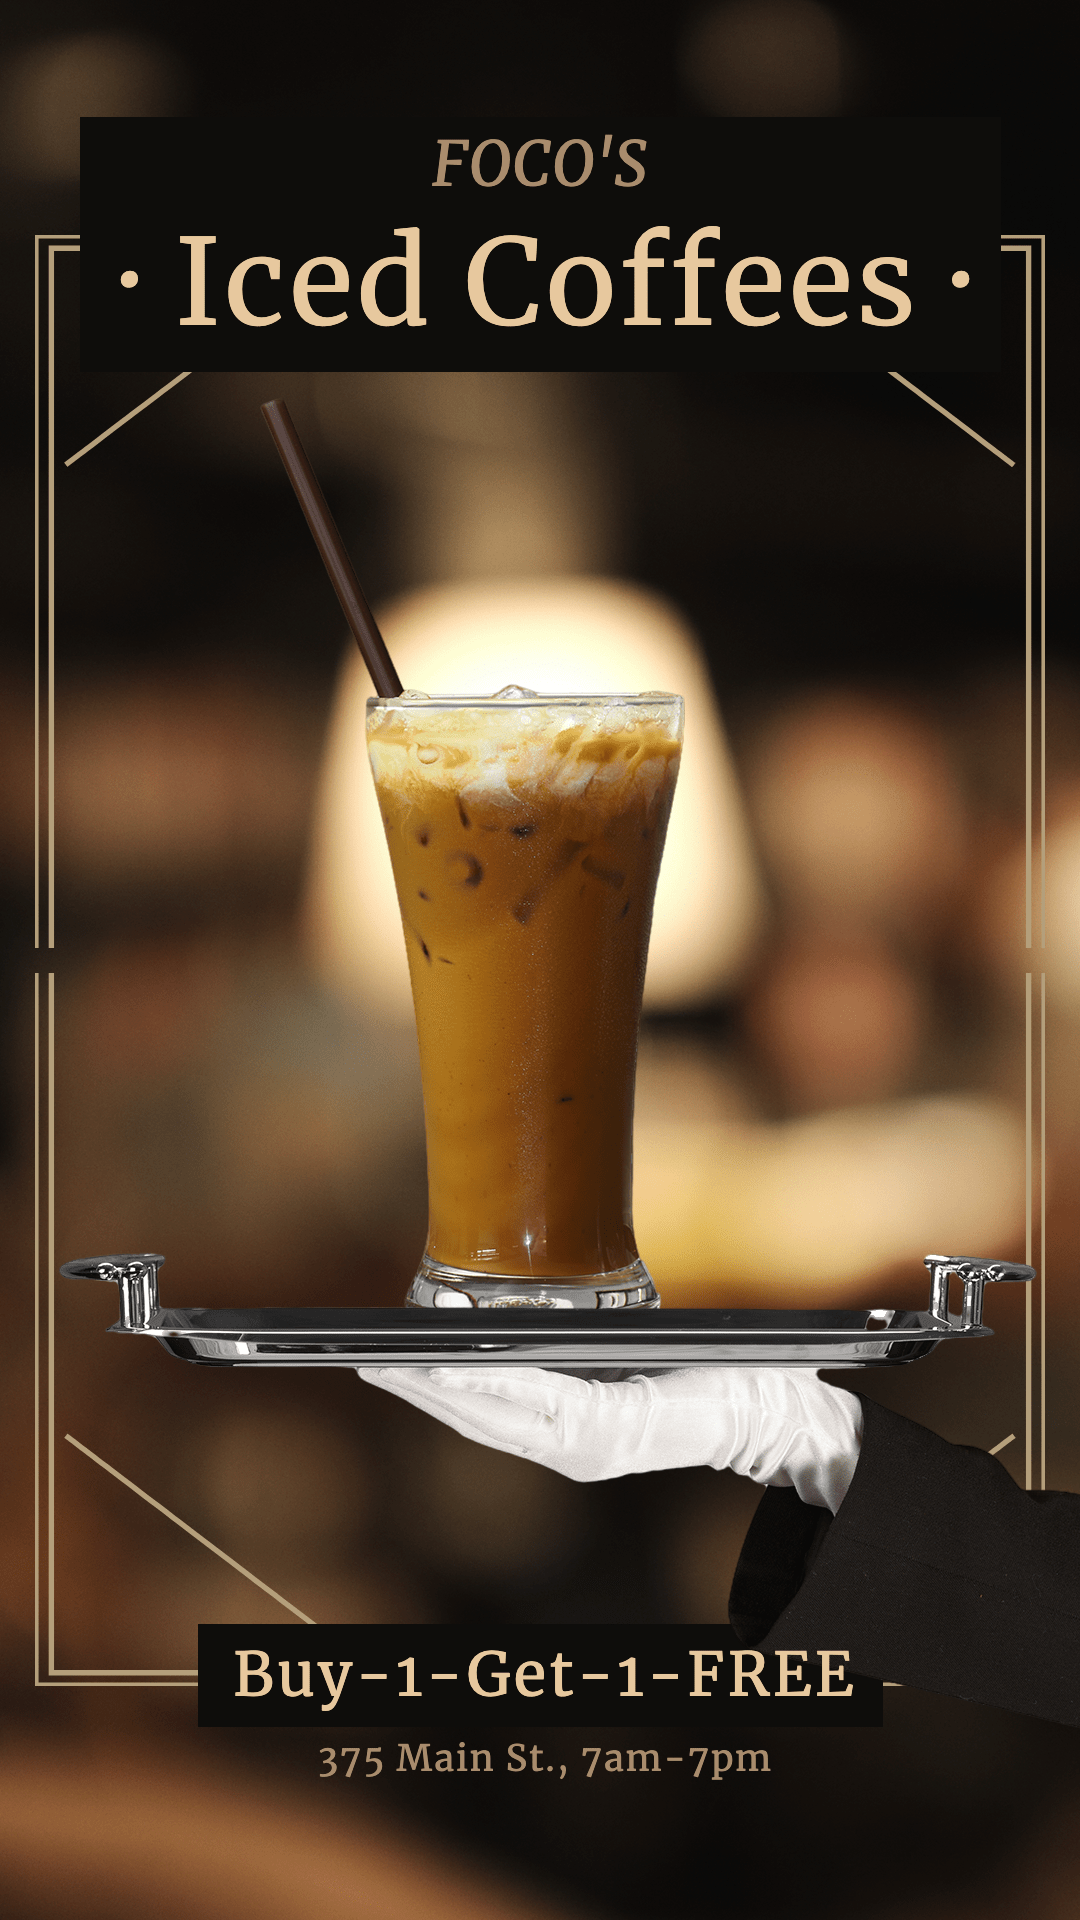 Iced Coffee Sale Promotion Cutout Ecommerce Story预览效果